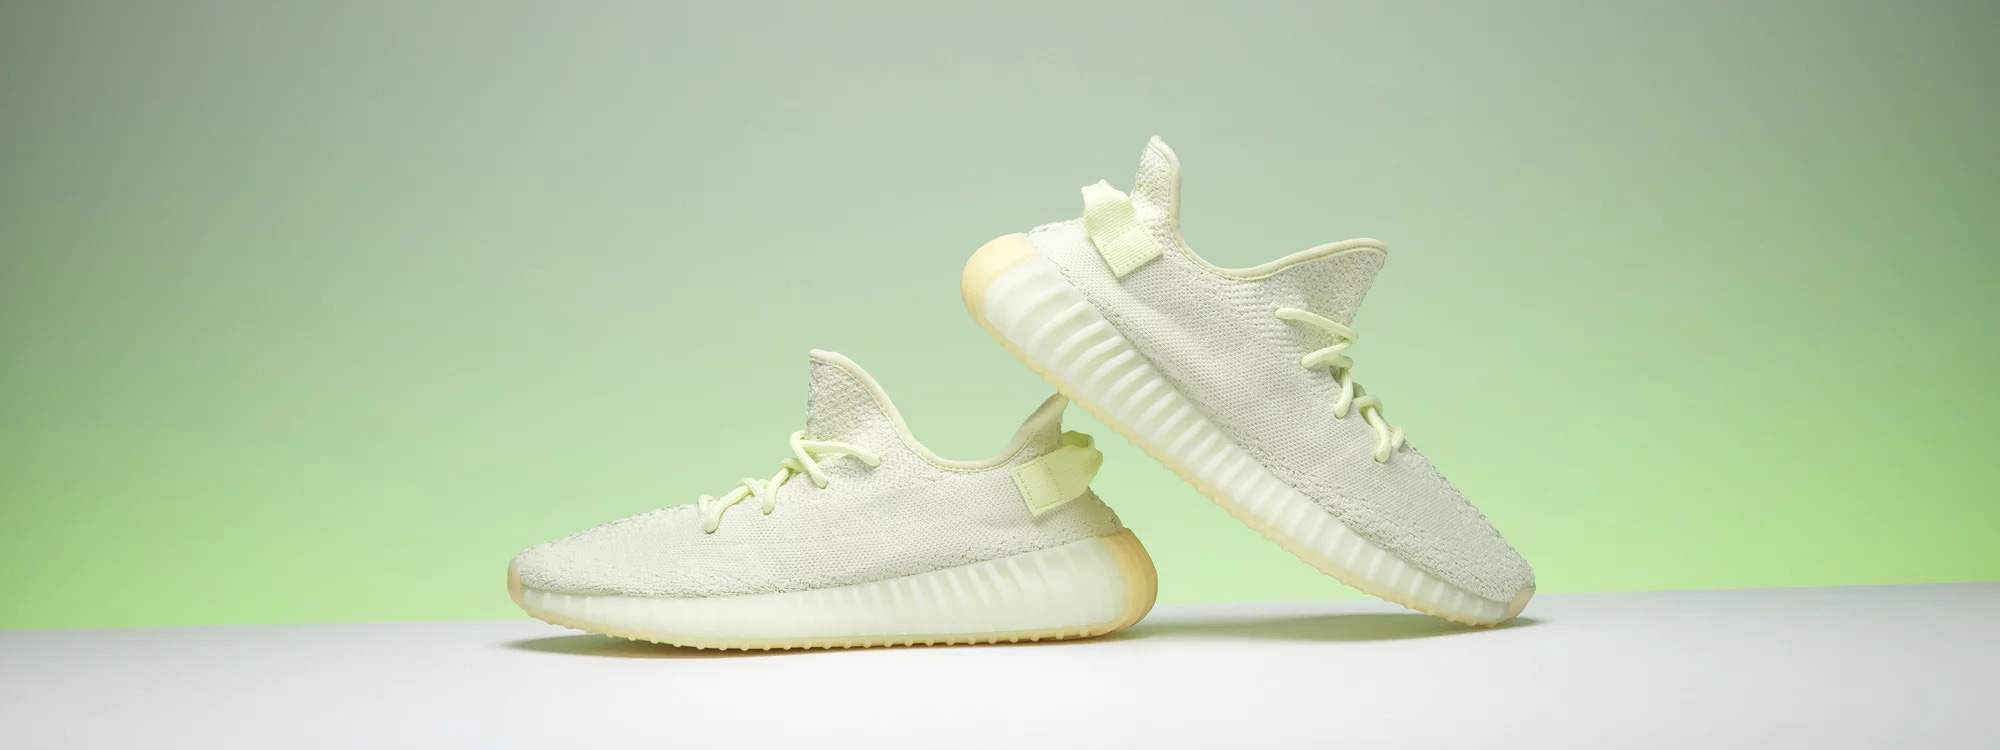 How to get The best Adidas Yeezy Boost 350 V2 Butter sneakers